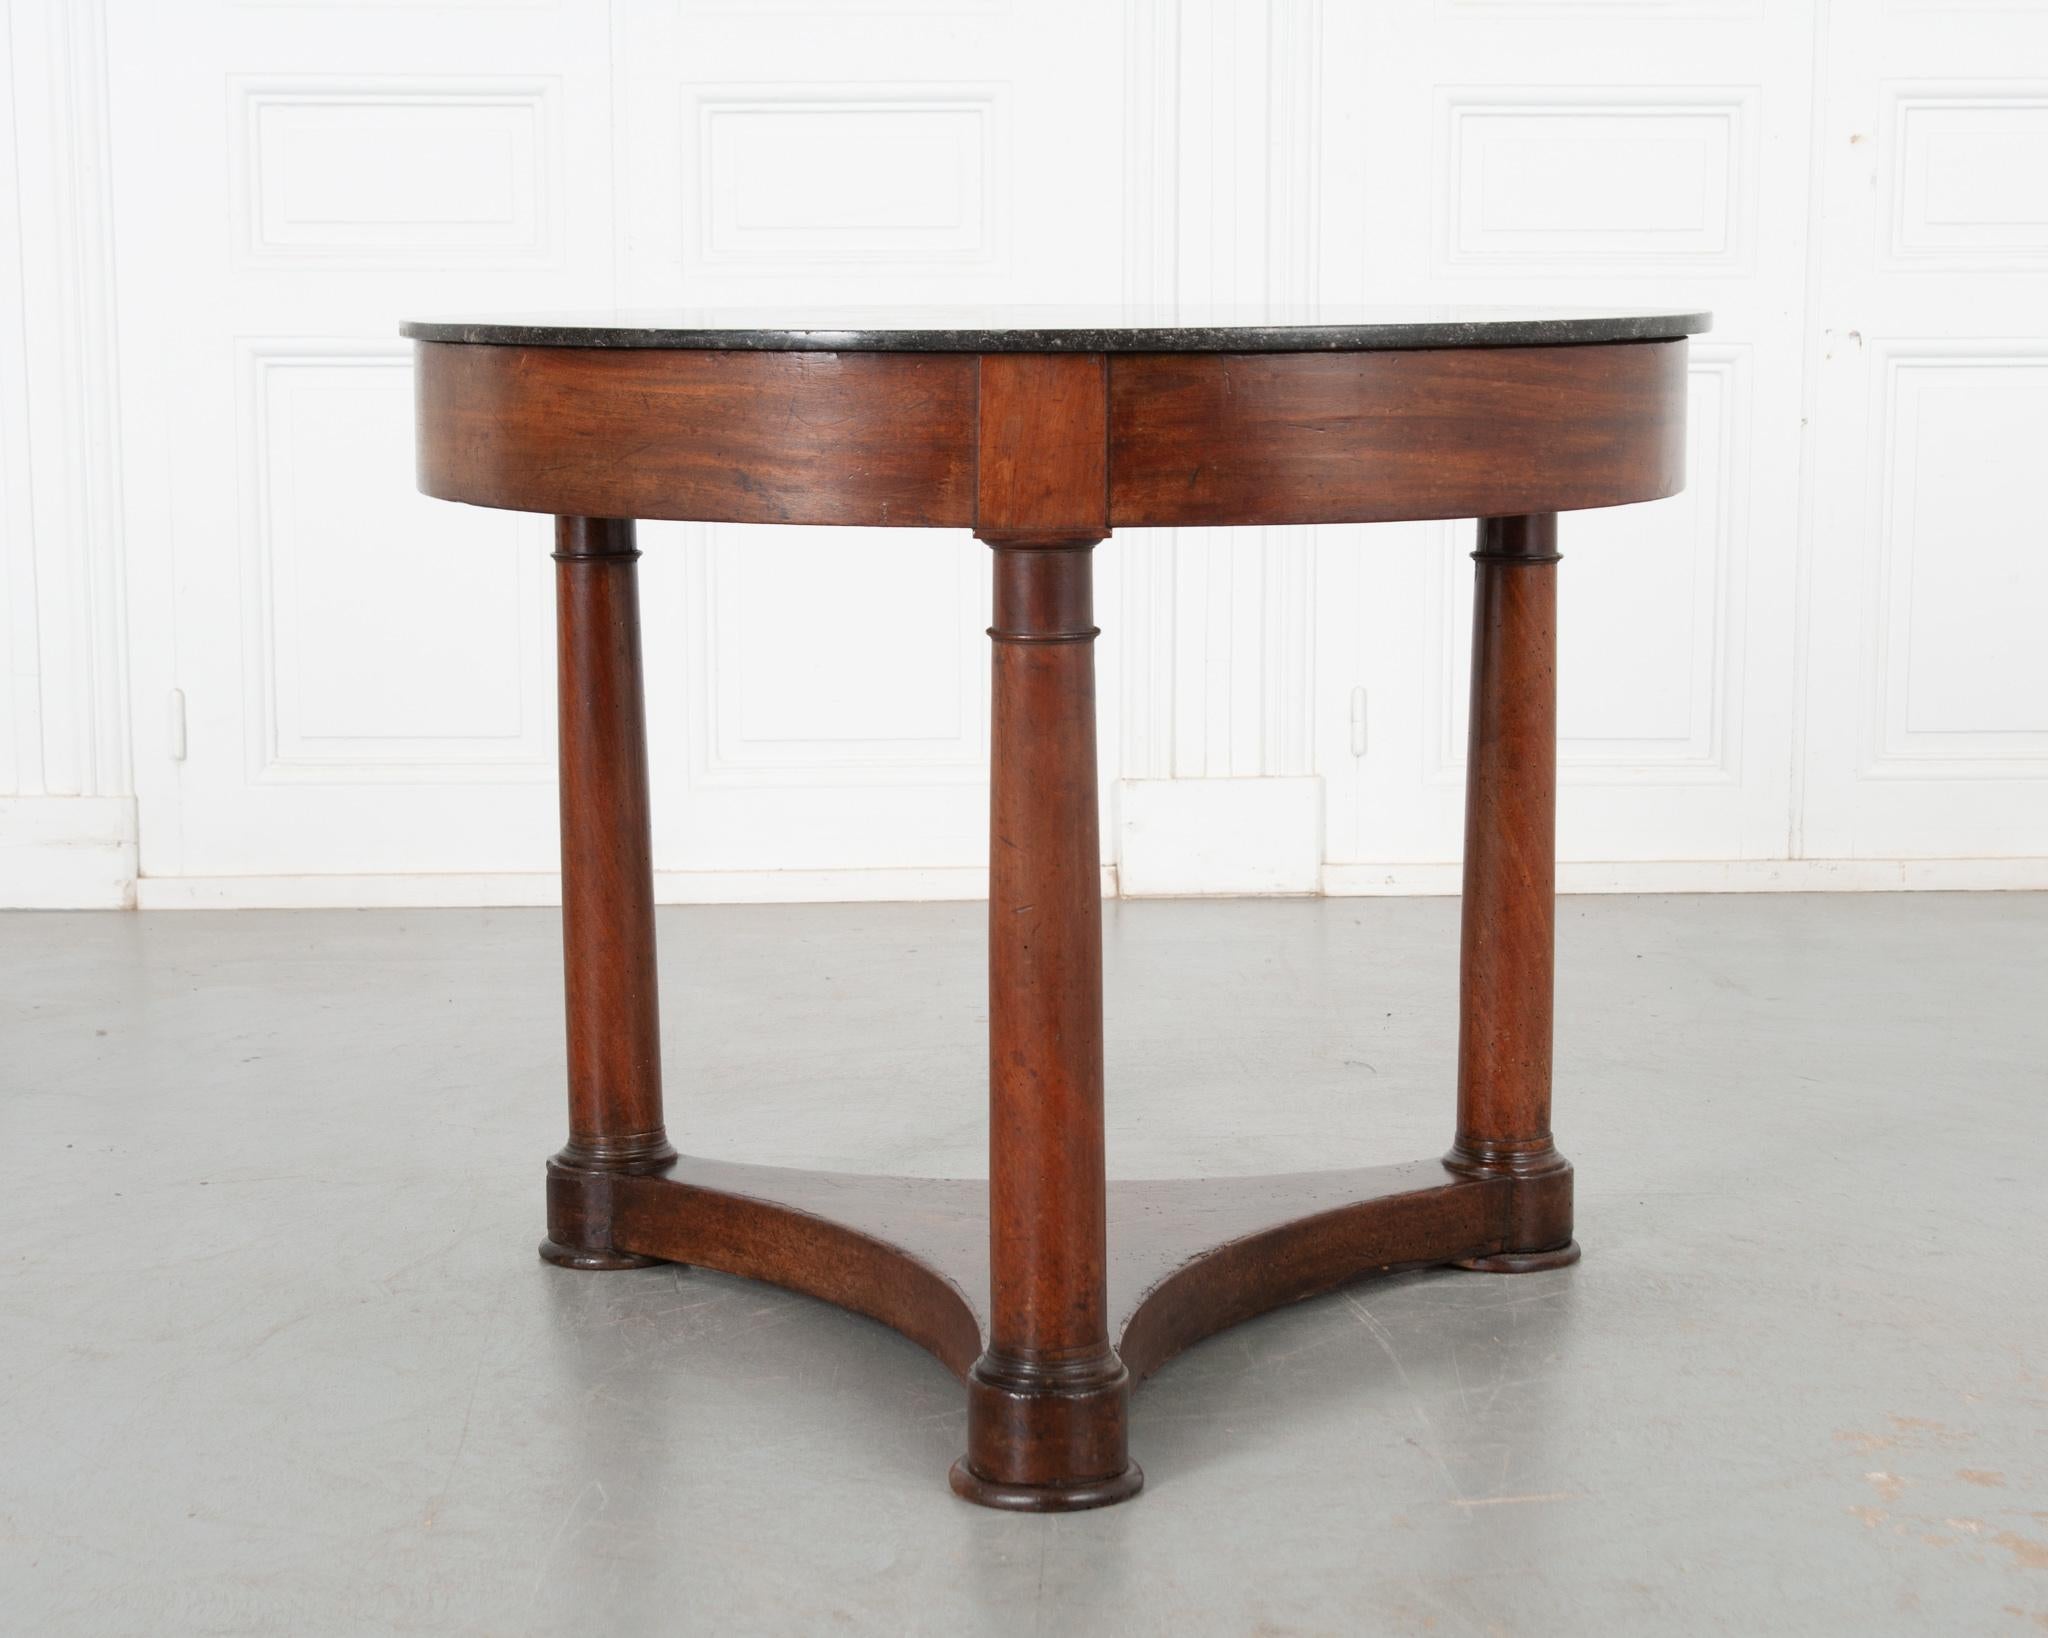 A sizable Empire style gueridon table from 19th century France. Beautiful black fossil marble top over a patinated mahogany body. A simple apron showcases the deep toned wood. Three columnar legs connect to a concave shaped stretcher that sits flush